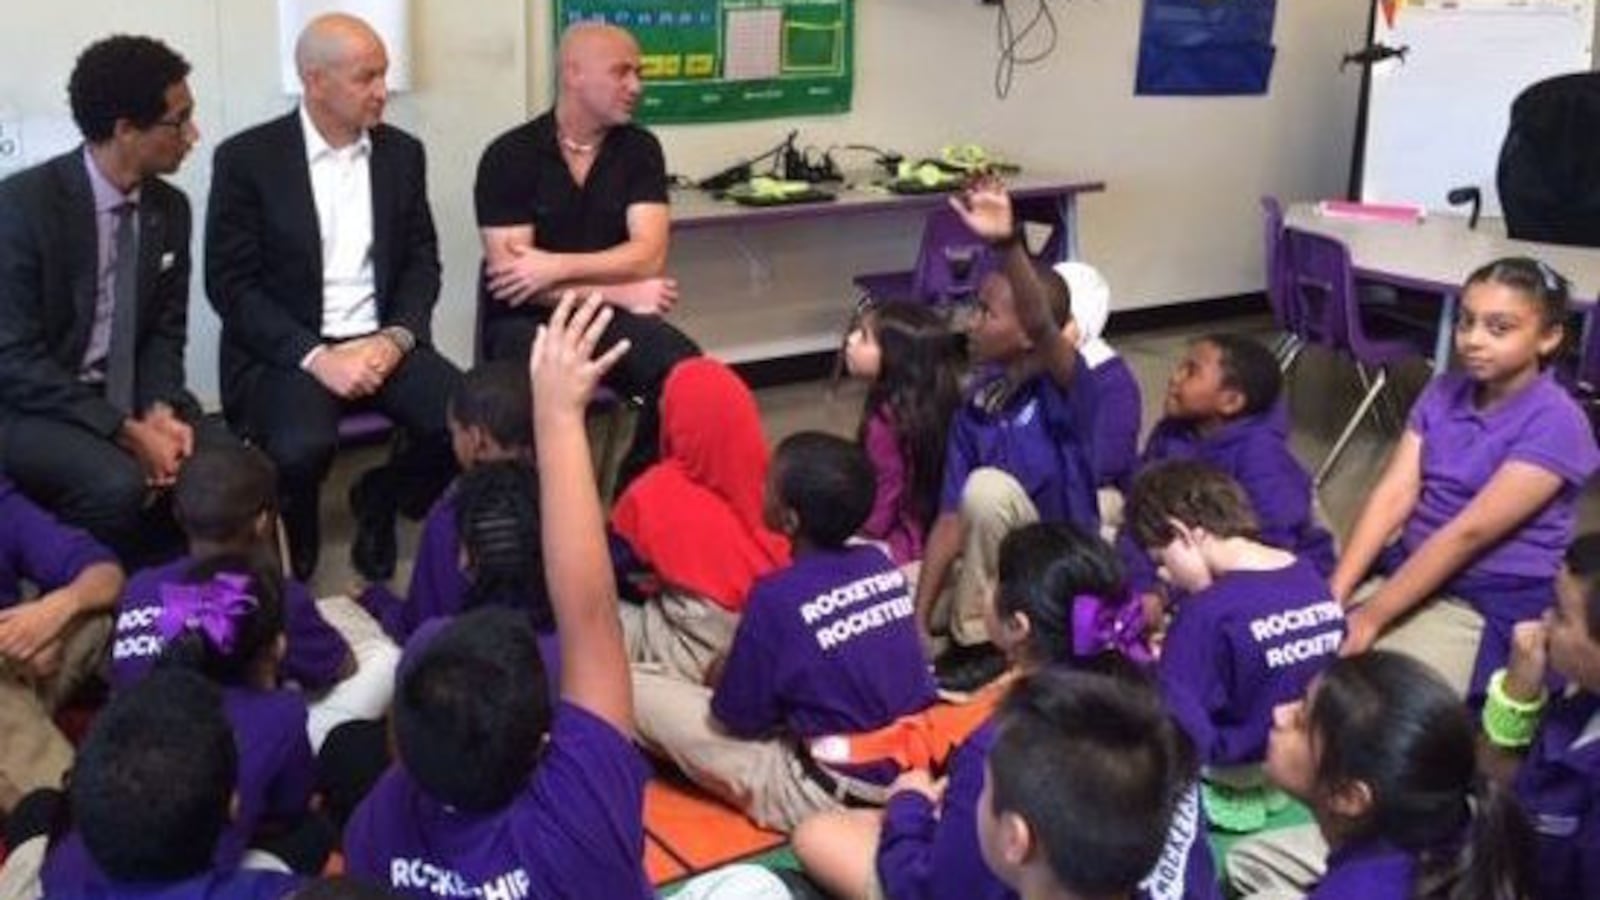 Tennis star and charter supporter Andre Agassi fields questions from fourth-graders last week at a Nashville charter school opened this fall by Rocketship. The California-based charter network has appealed a decision by Nashville's school board denying its request for further expansion.